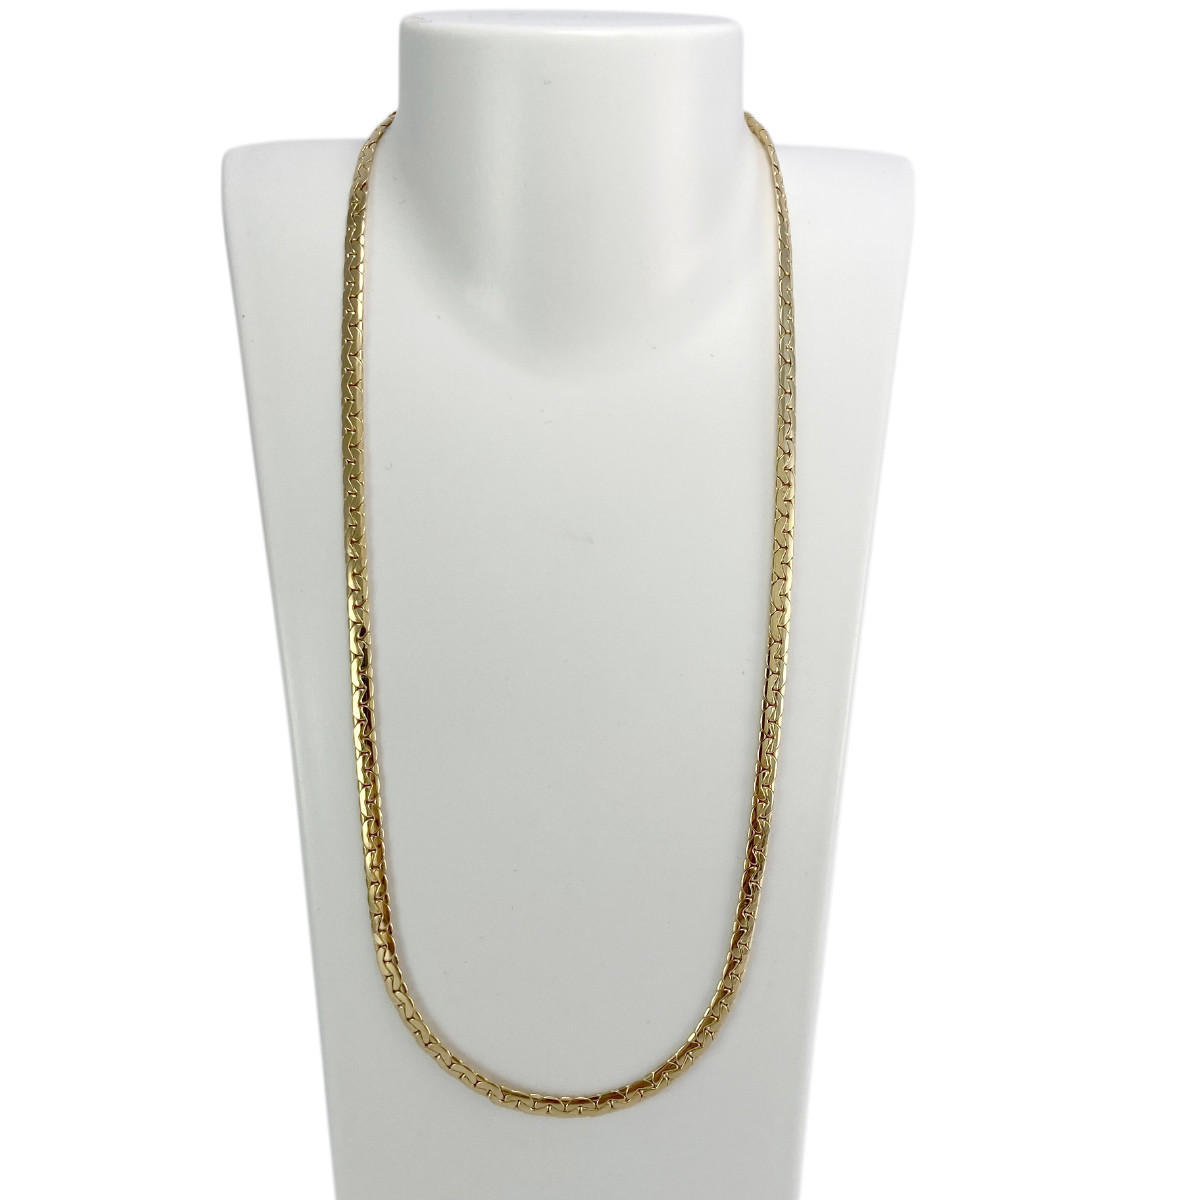 Collier d'occasion or 750 jaune maille haricot - vue 2